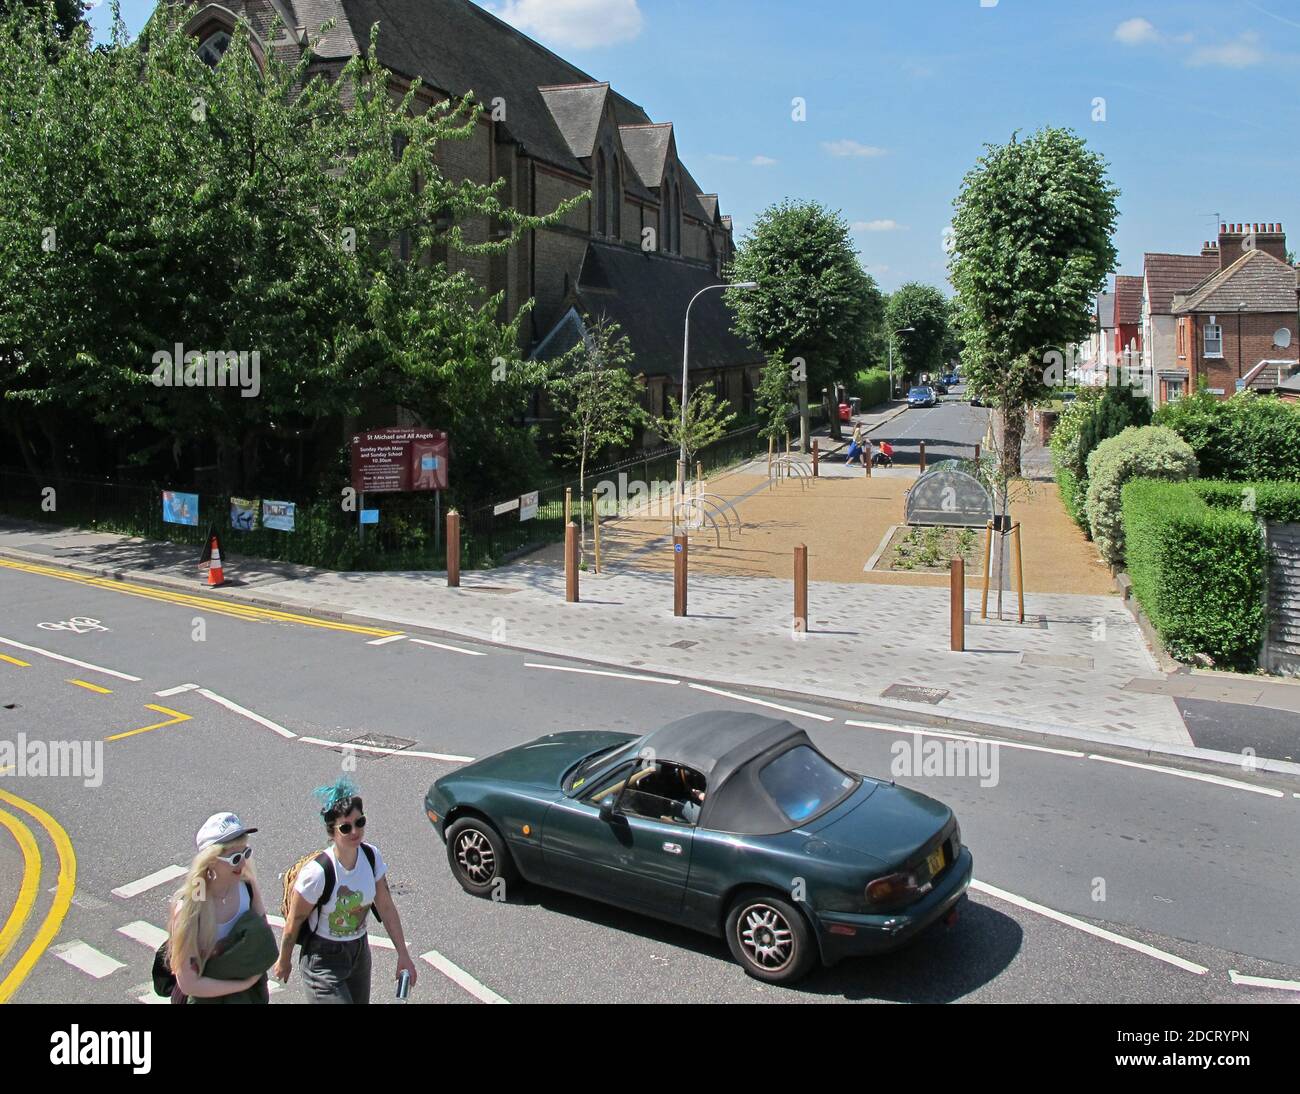 Palmerston Rd & Northcote Rd junction closure and landscaping, Walthamstow, London, UK. Part of Waltham Forest's Mini Holland scheme for safer streets Stock Photo